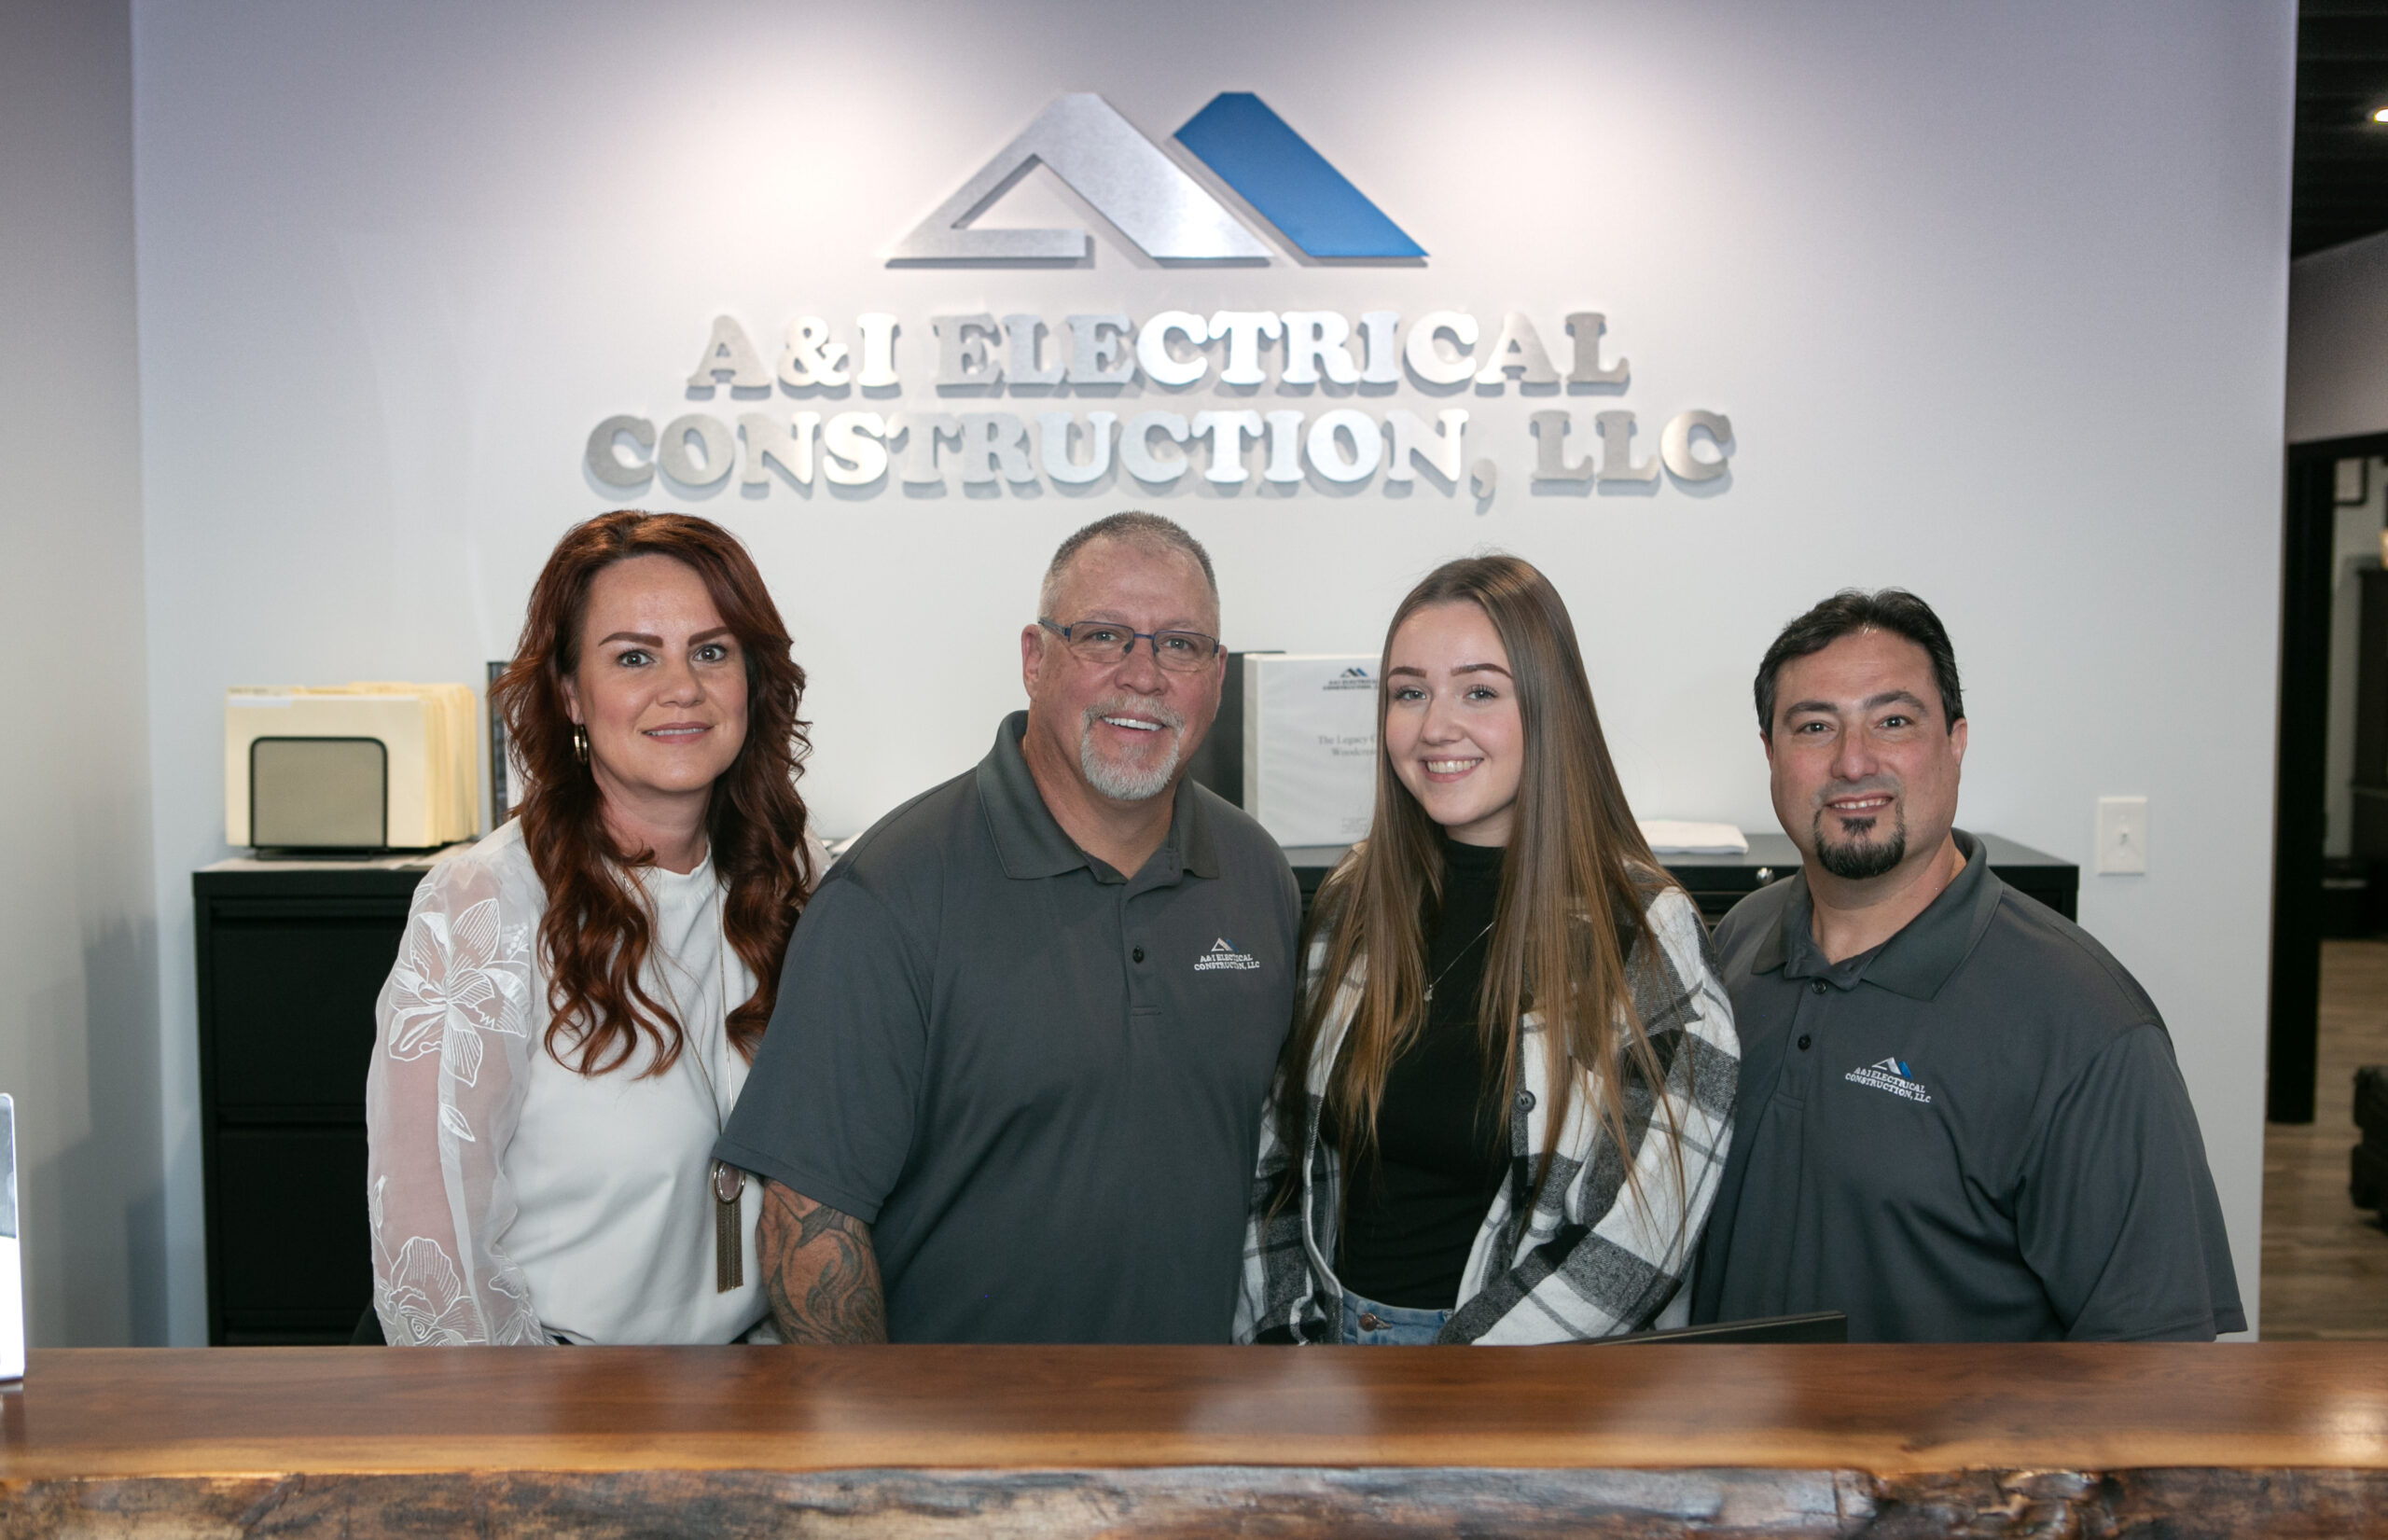 A&I Electrical Construction